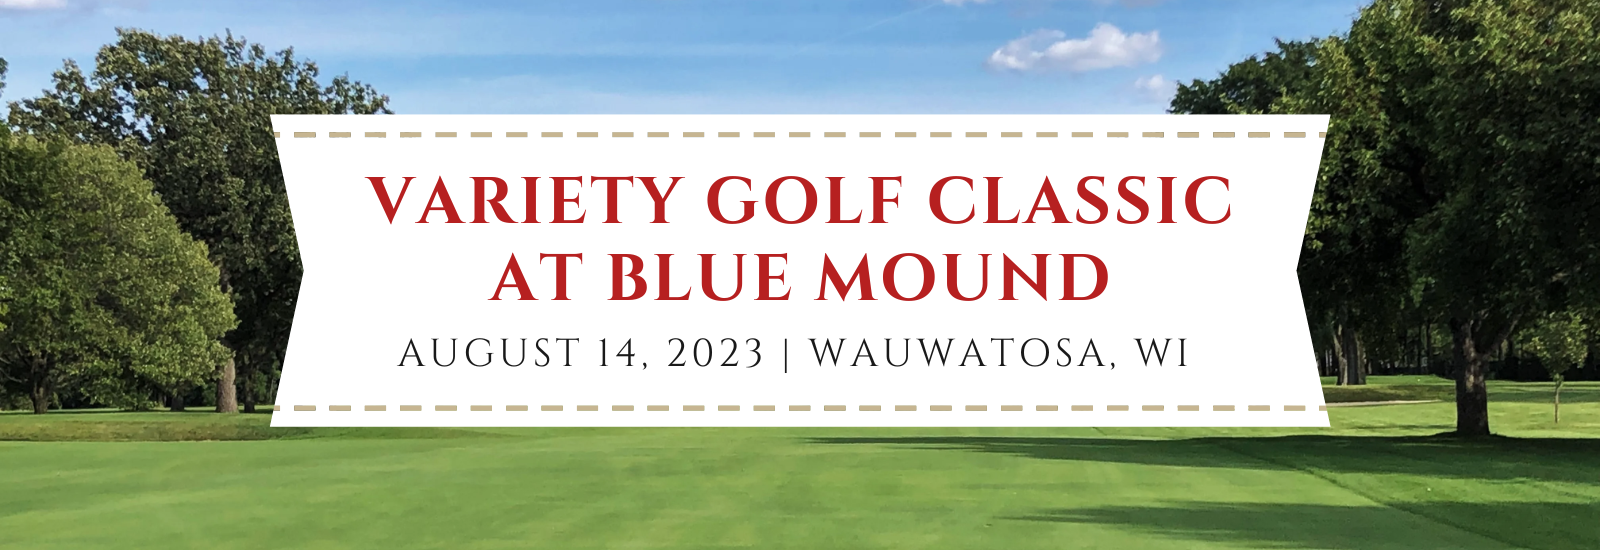 Variety Golf Classic at Blue Mound - Variety - the Children's Charity of Wisconsin